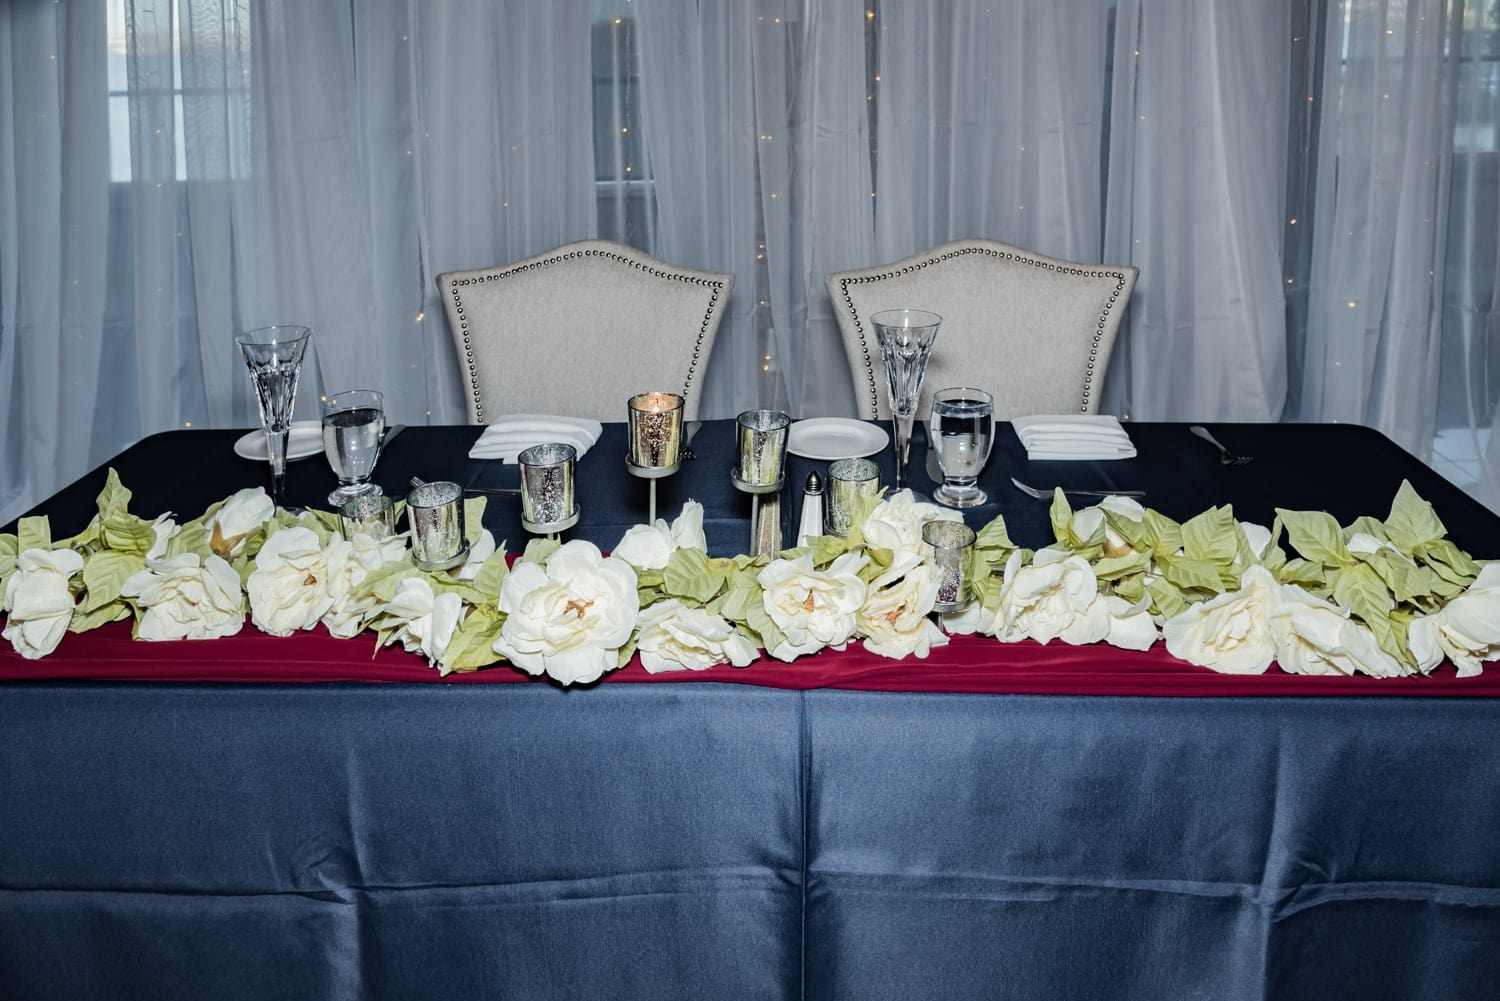 the sweetheart table at a the Bedford Basin Farmer's Market wedding.